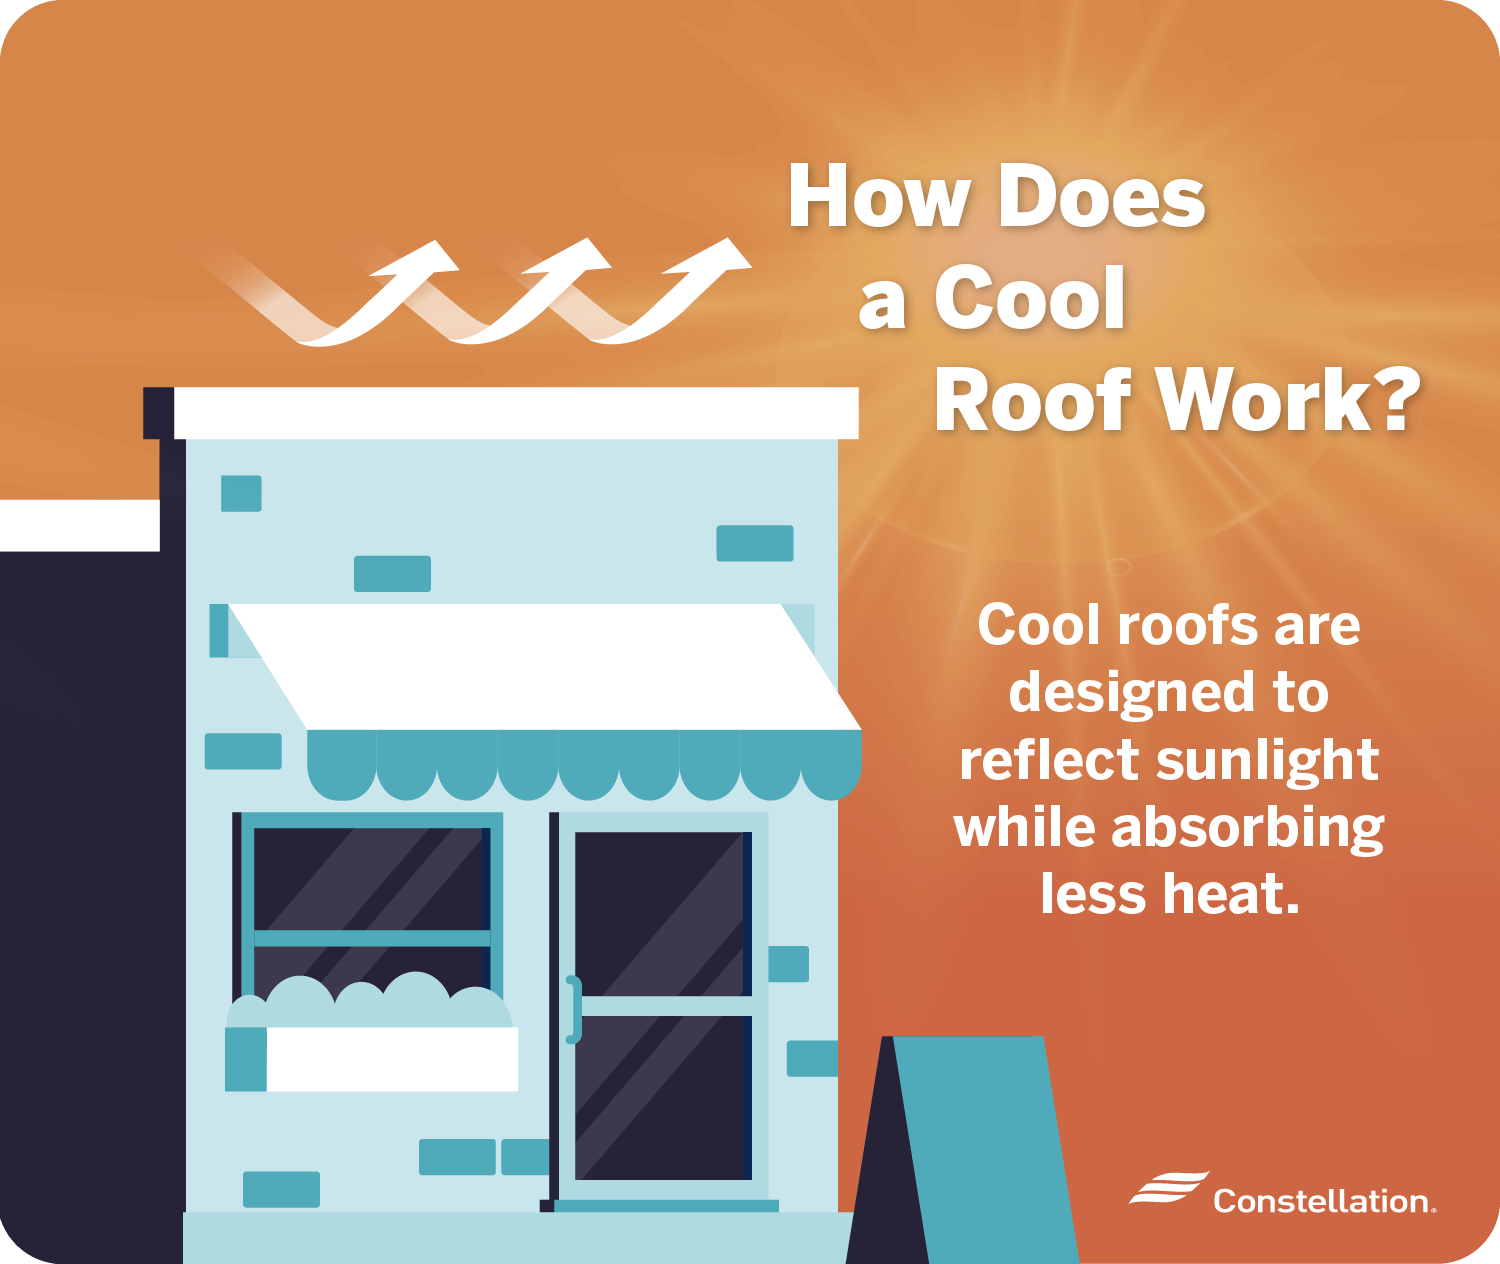 How does a cool roof work?